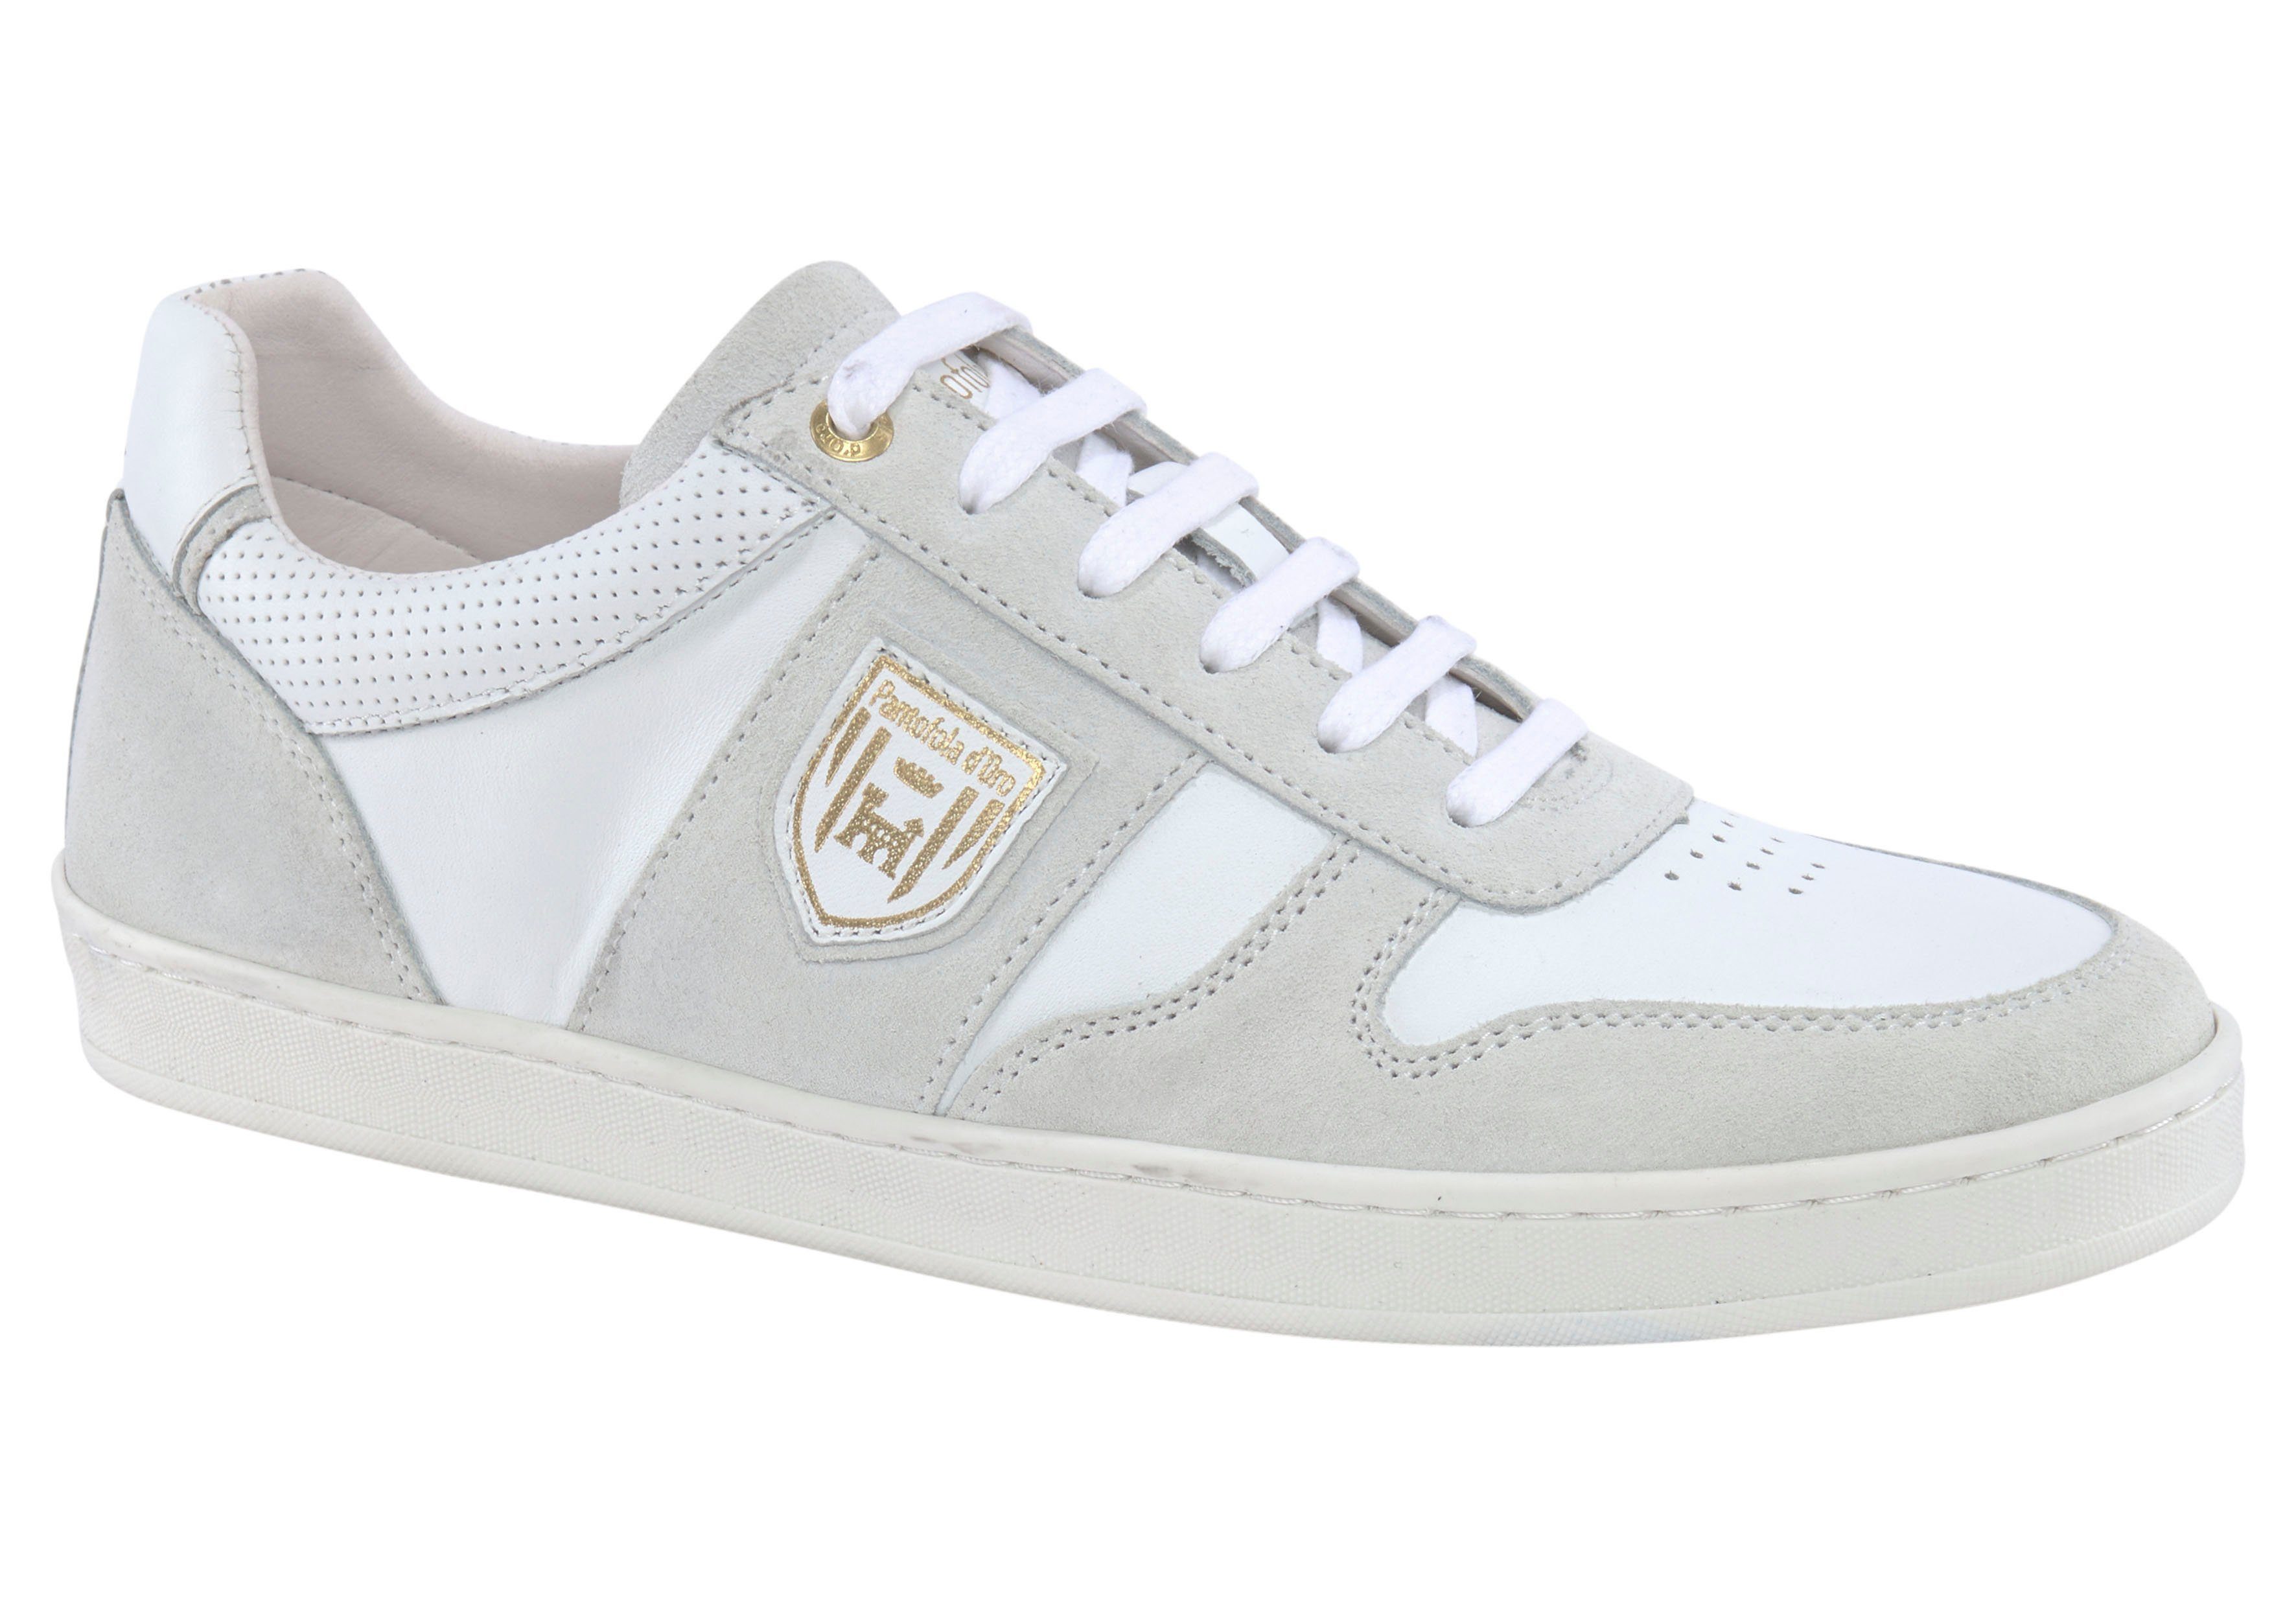 Pantofola d´Oro PALERMO UOMO LOW Sneaker im Casual Business Look weiß